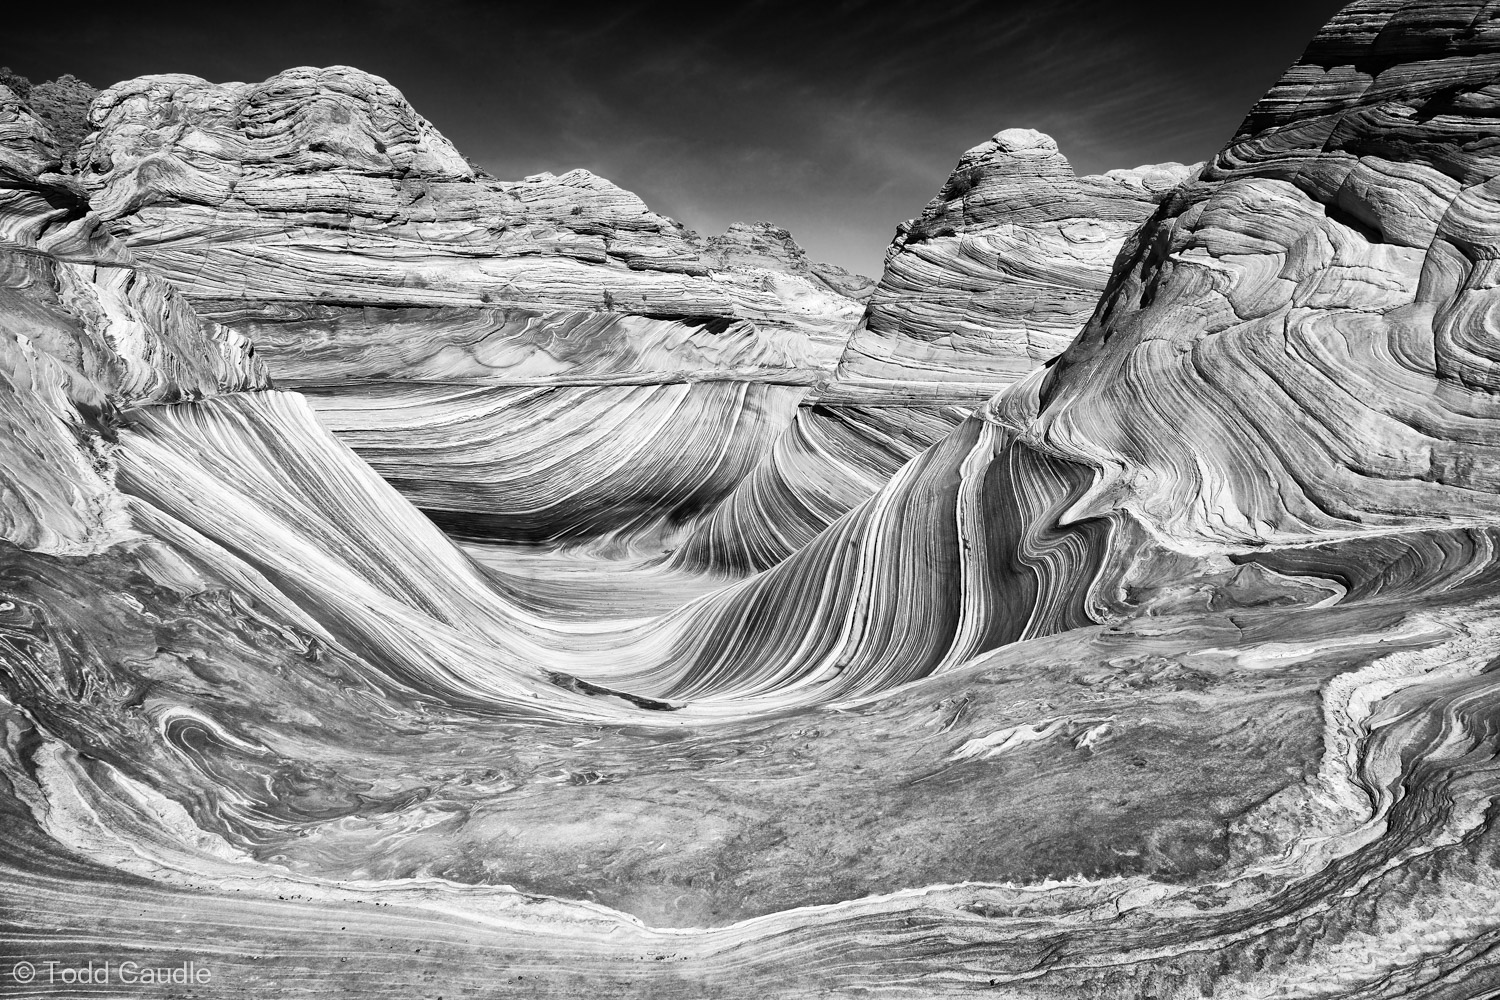 Ribbons of layered sandstone create astonishing patterns at The Wave. So sensitive is this rock that only a select few are allowed...